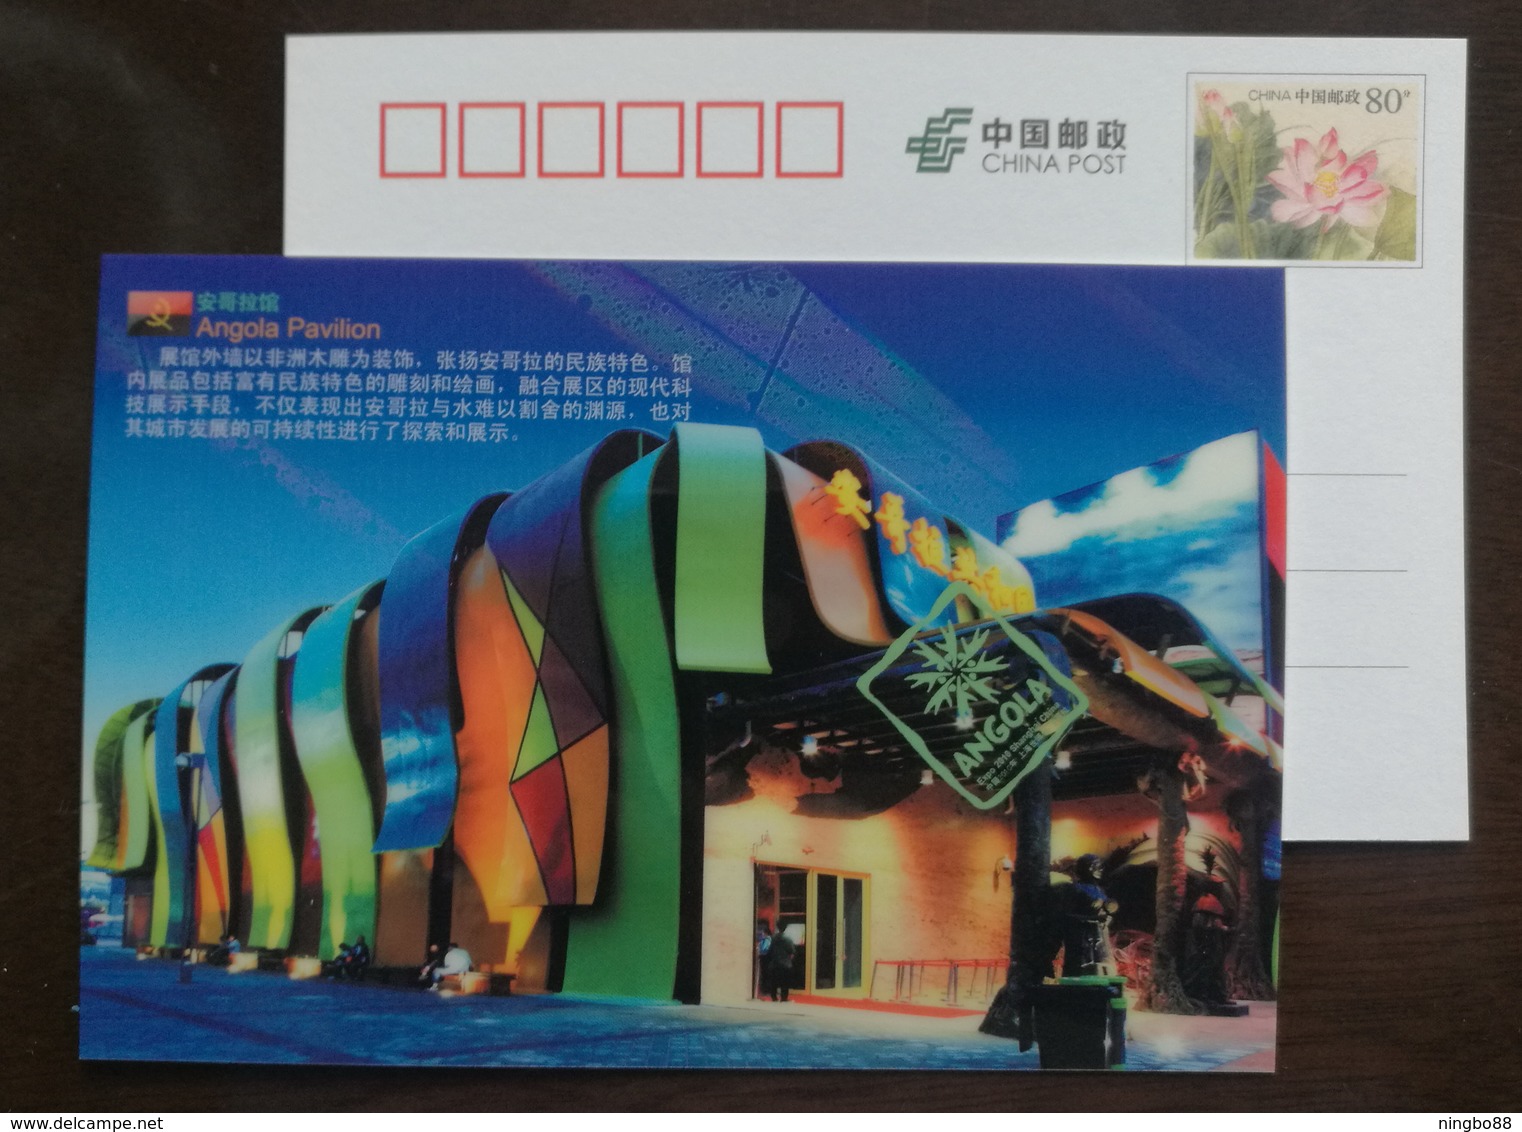 Angola Pavilion Architecture,China 2010 Expo 2010 Shanghai World Exposition Advertising Pre-stamped Card - 2010 – Shanghai (China)